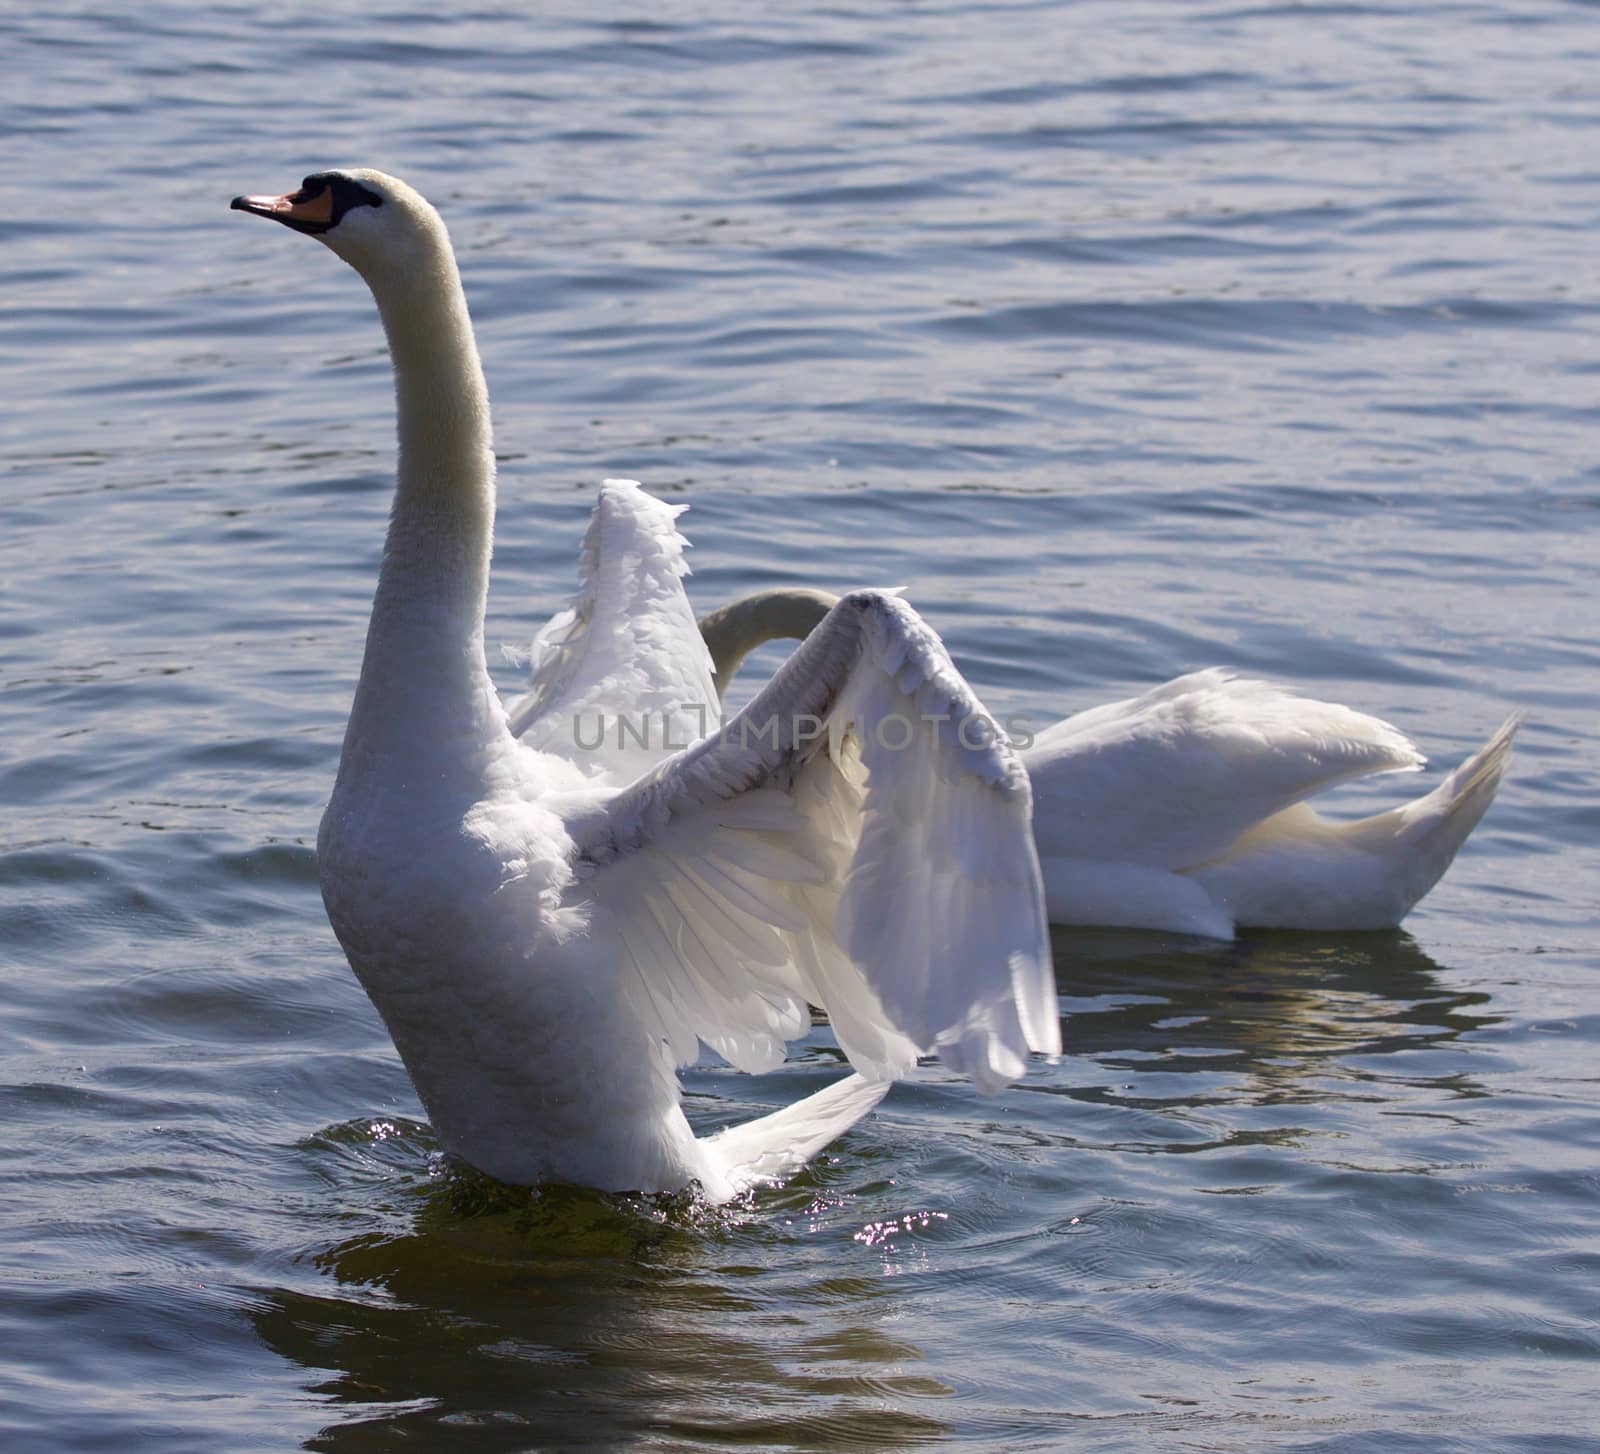 Beautiful photo of the swan with the opened wings in the lake